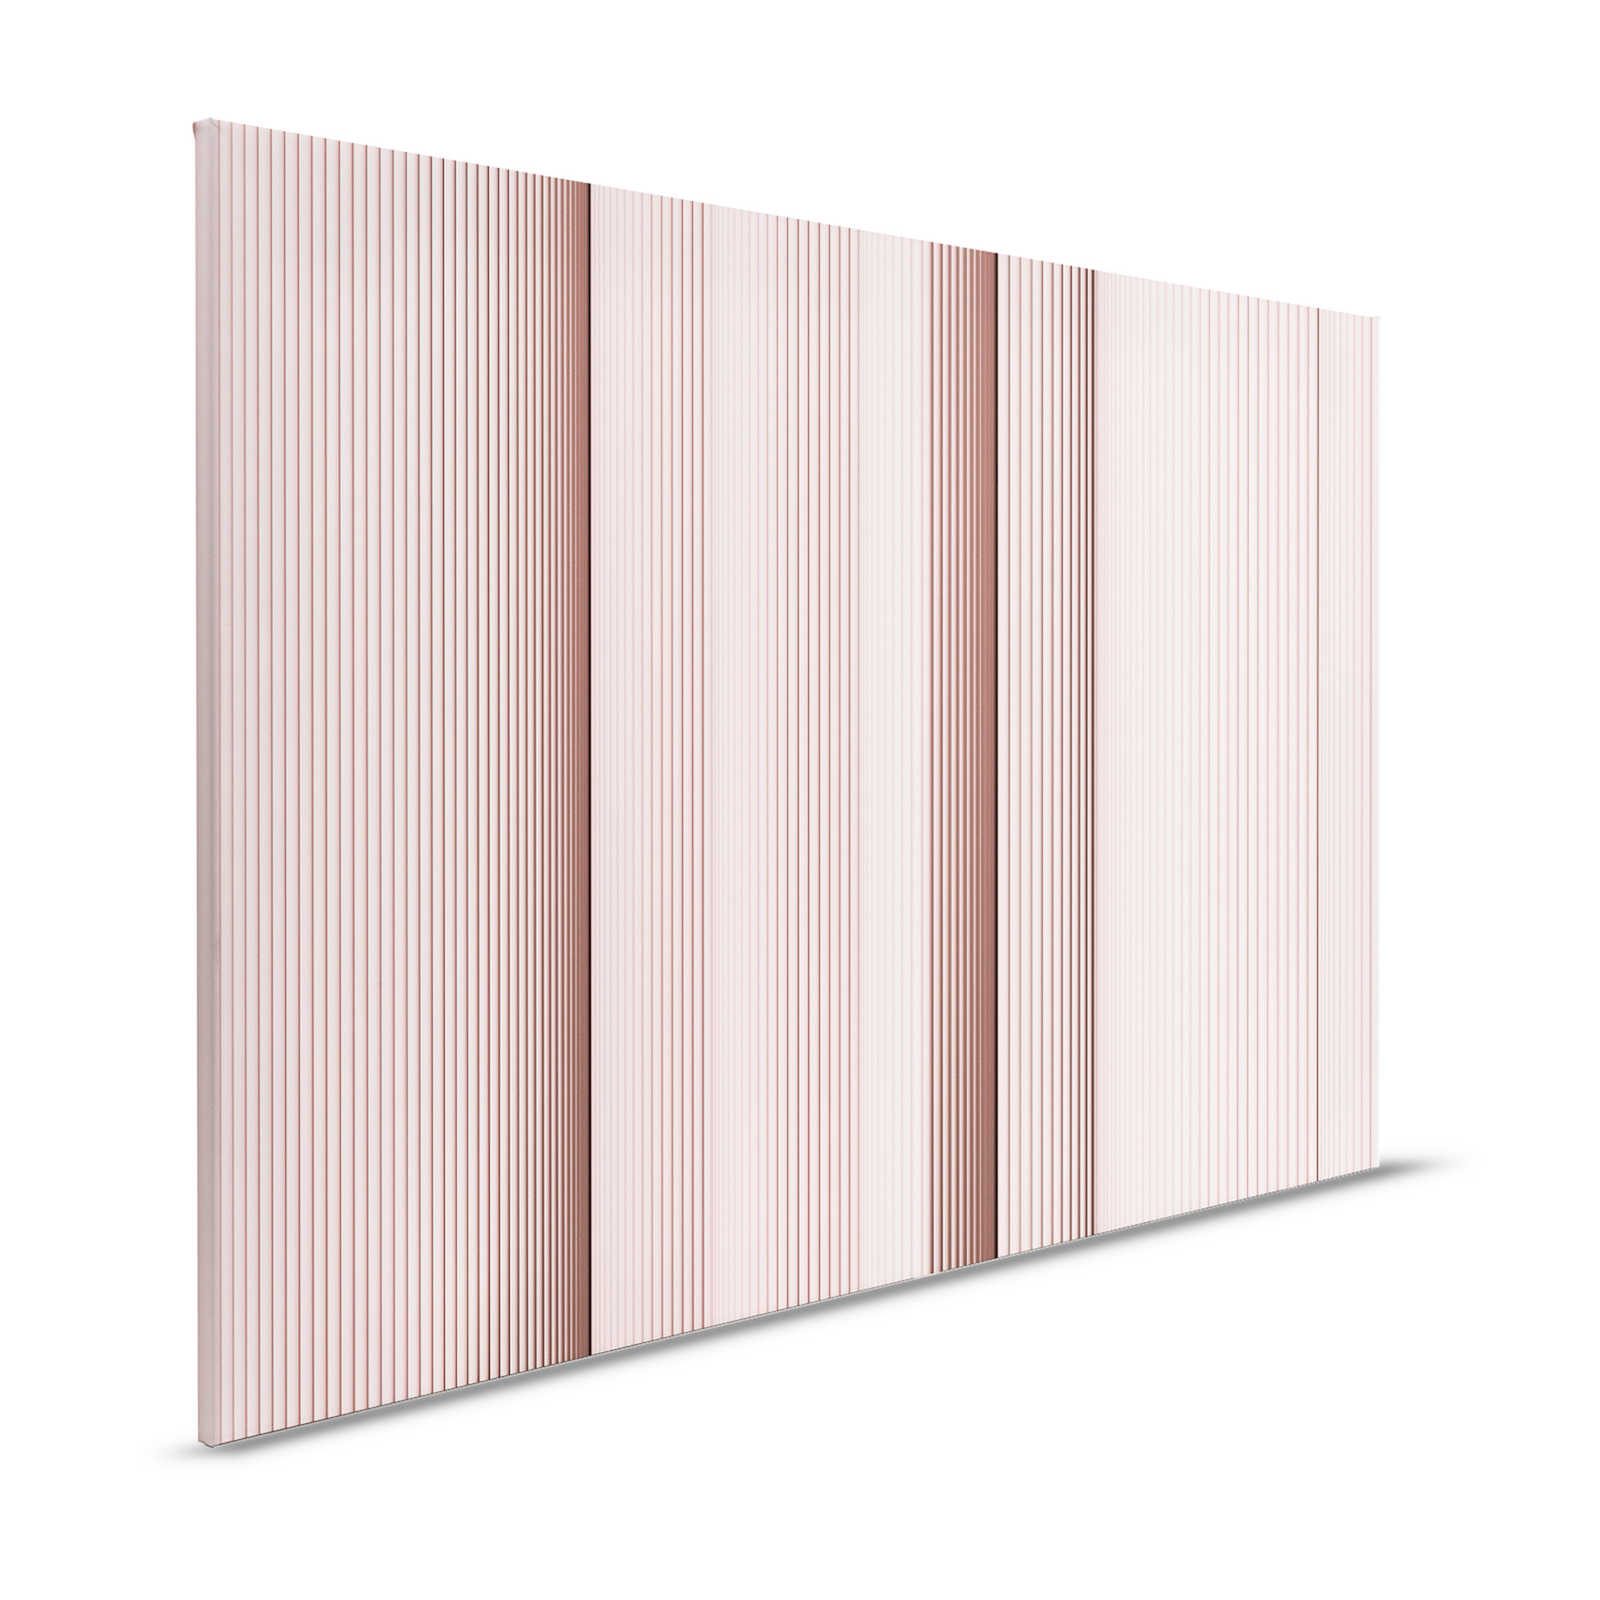 Magic Wall 4 - Stripe Canvas Painting with 3D Illusion Effect, Pink & White - 1.20 m x 0.80 m
